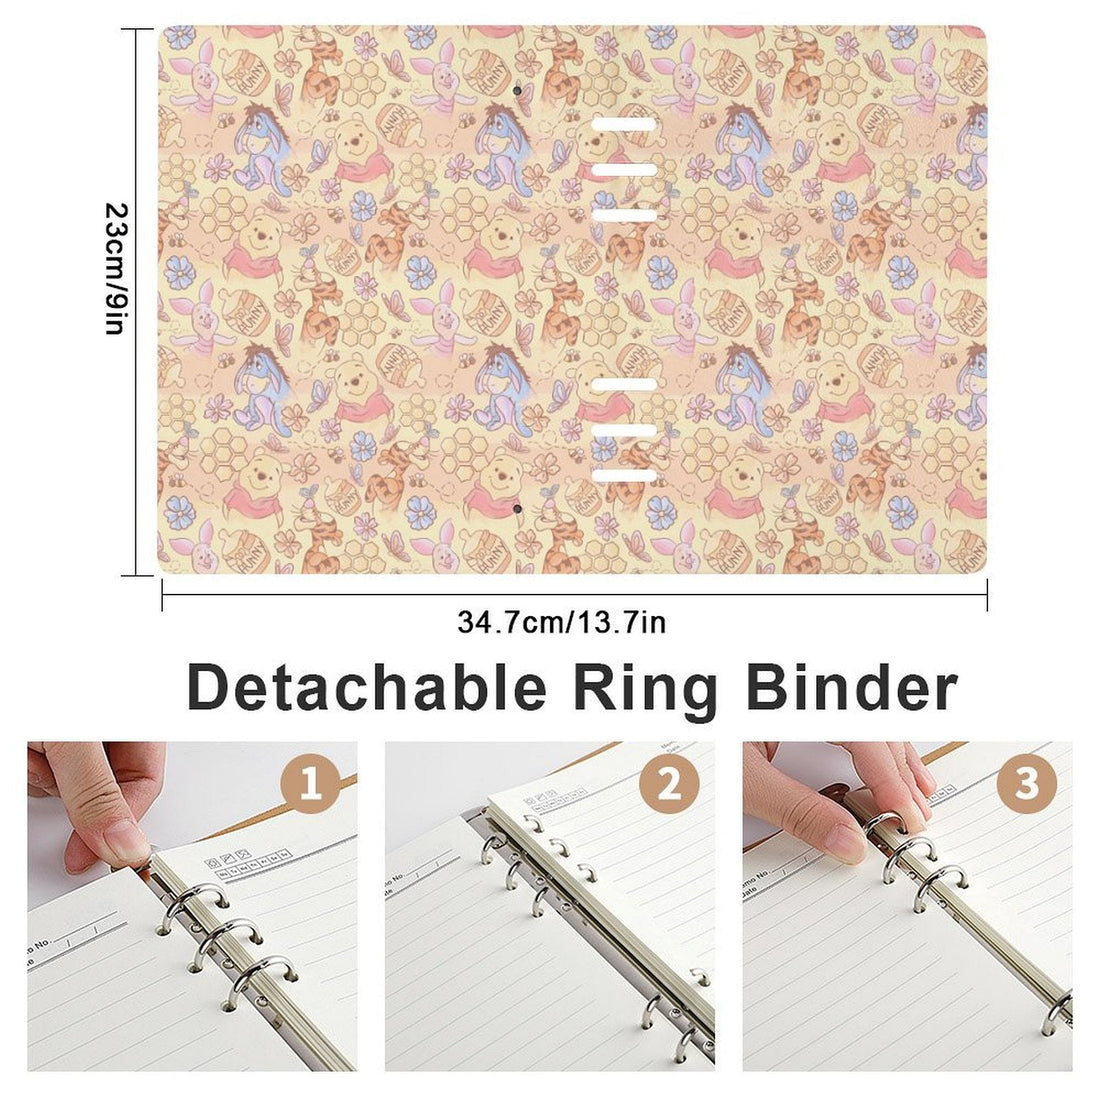 SCARY-Matching Notebook & Pen Sets Closing 1/5 ETA EARLY MARCH